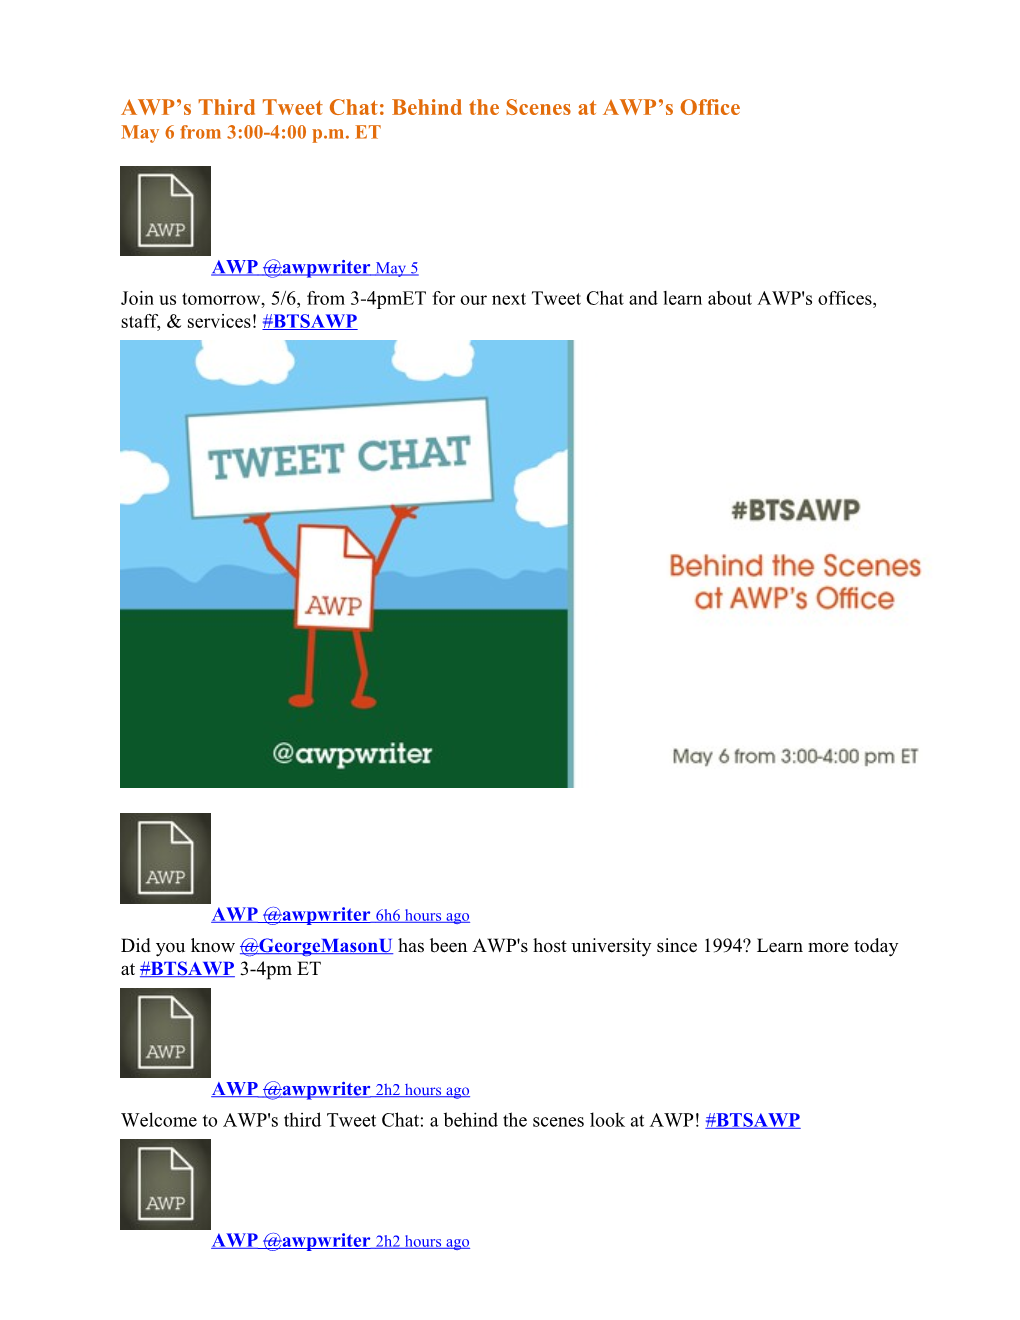 Join Us Tomorrow, 5/6, from 3-4Pmet for Our Next Tweet Chat and Learn About AWP's Offices